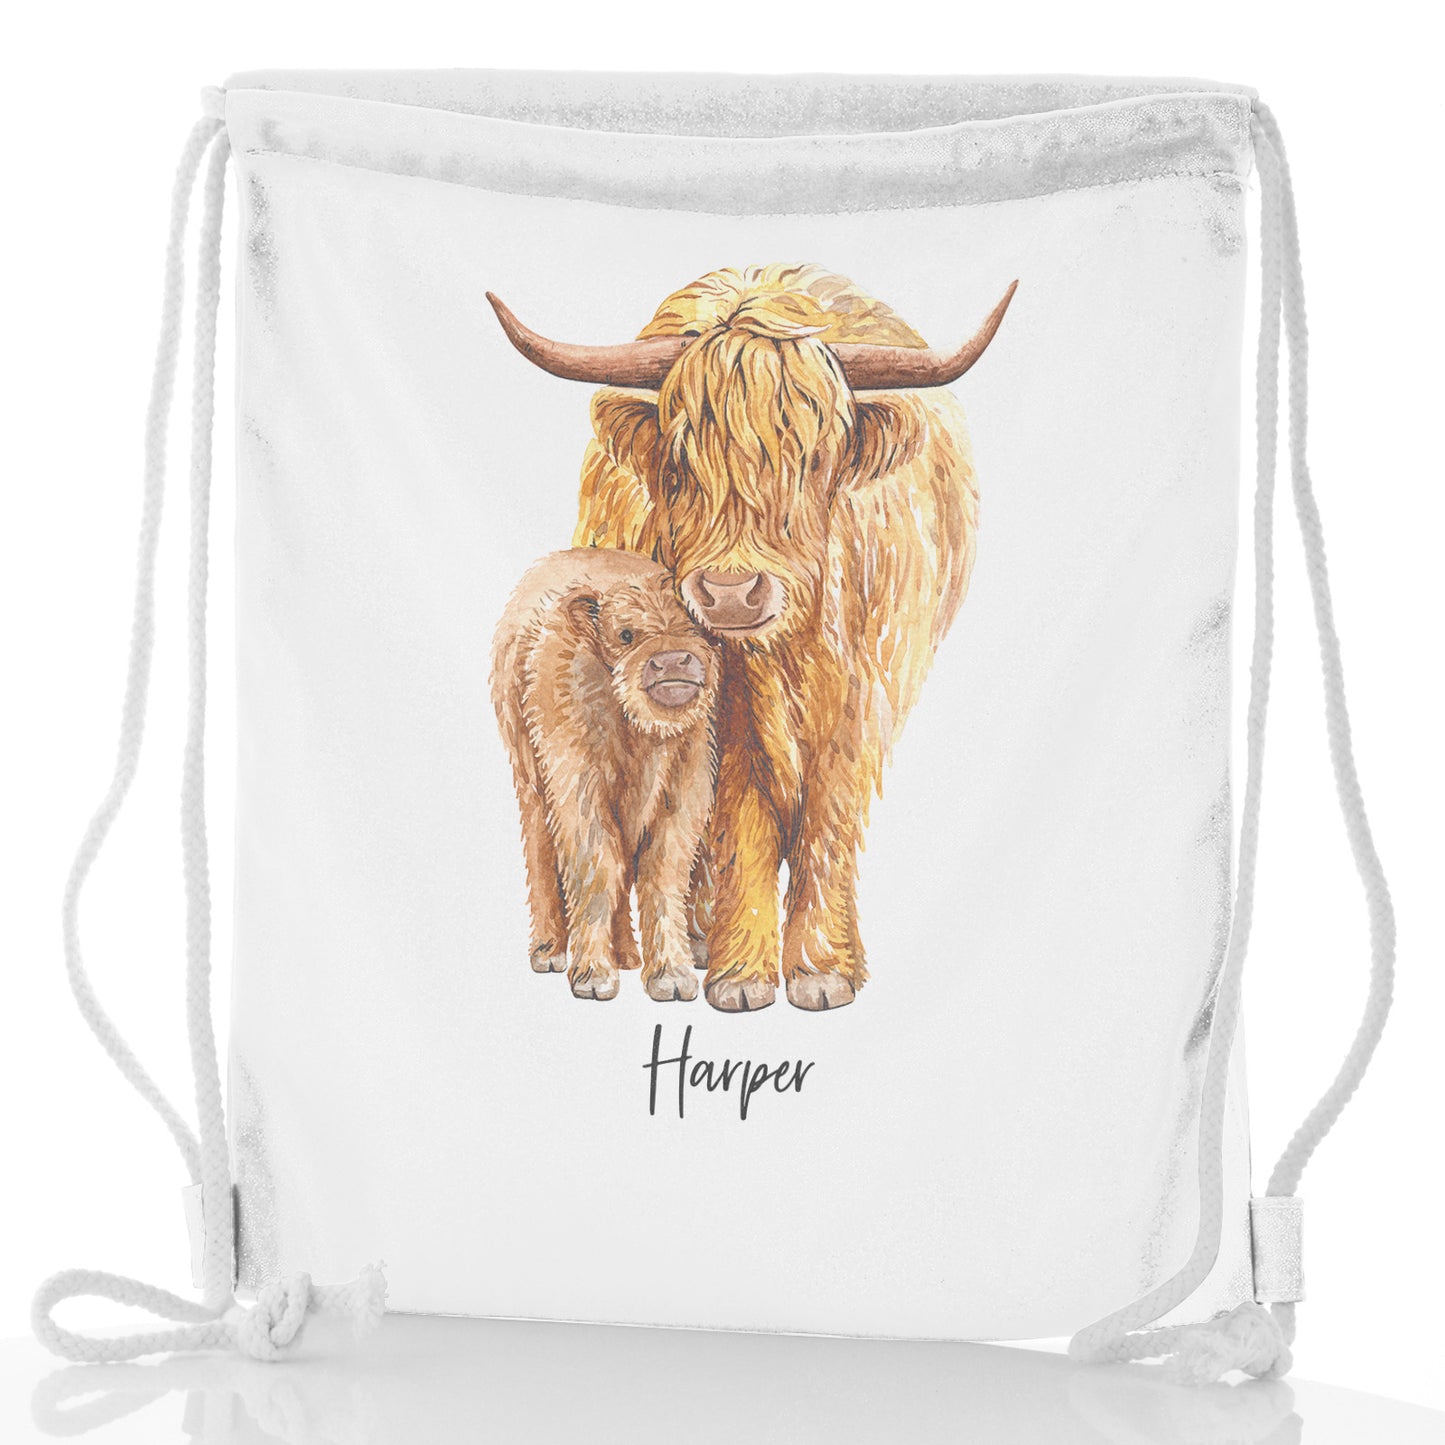 Personalised Glitter Drawstring Backpack with Welcoming Text and Relaxing Mum and Baby Highland Cows